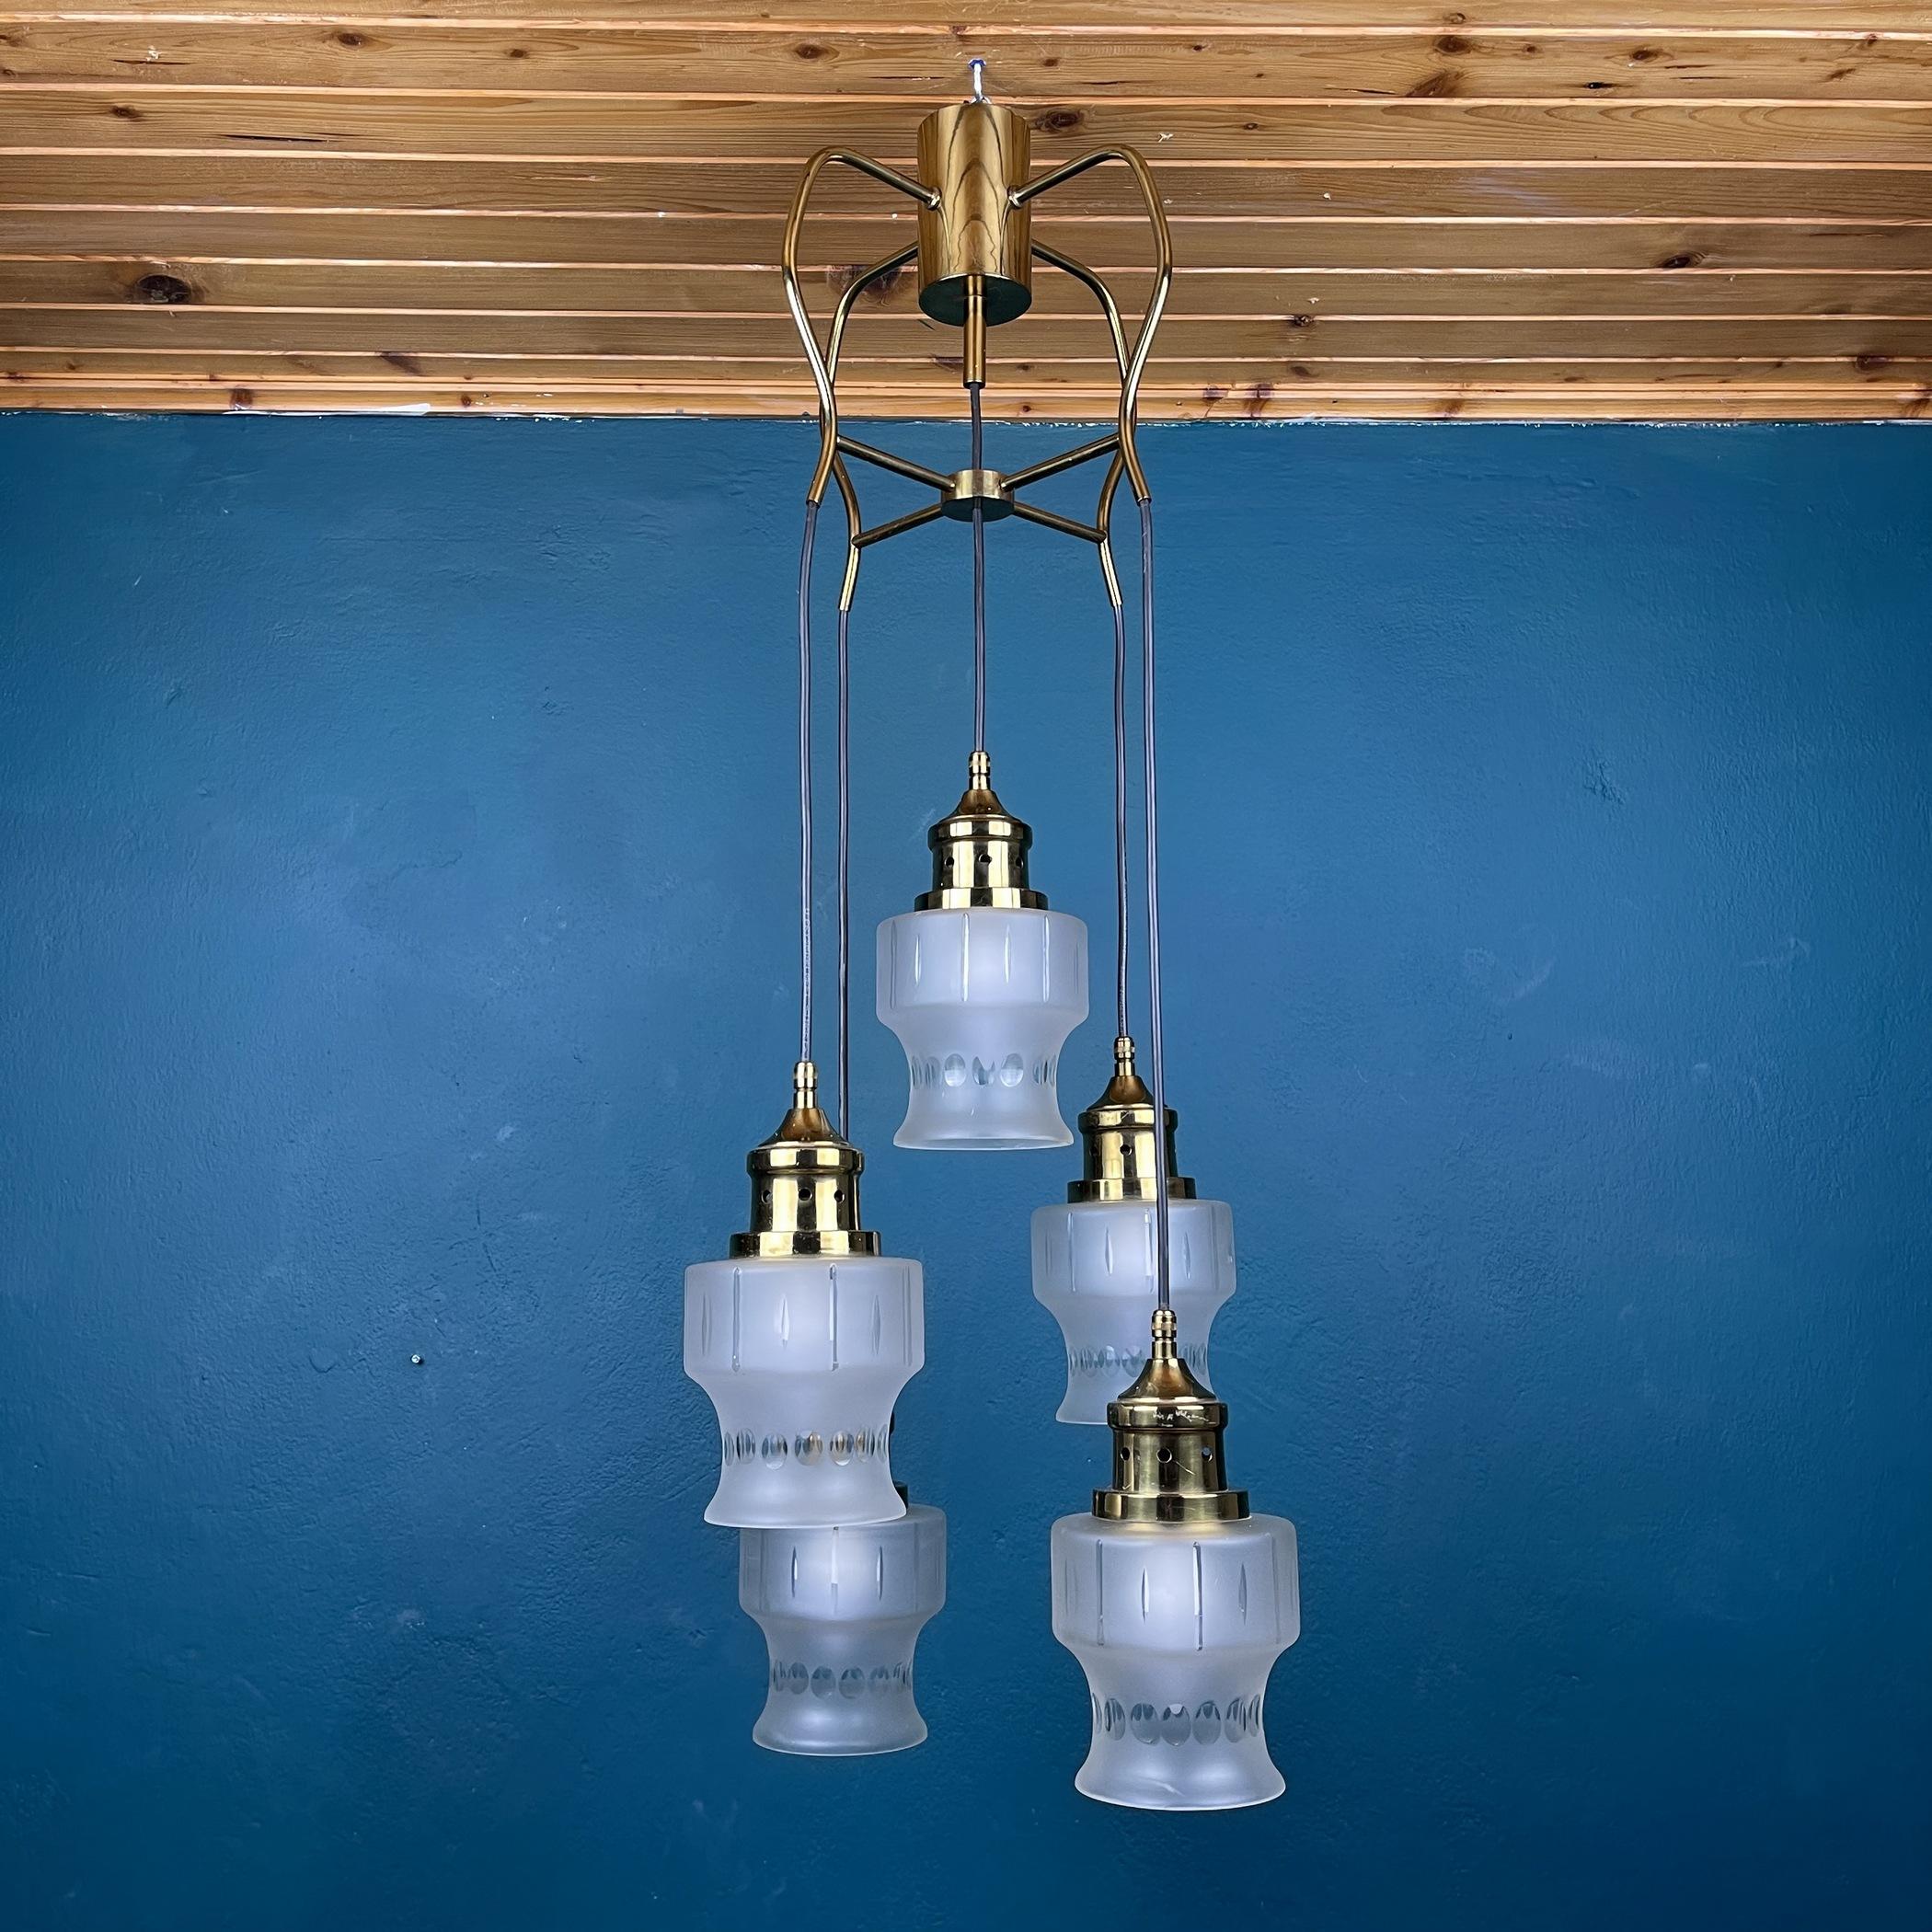 The rare Mid-Century Modern five-light cascading pendant lamp made in Italy in the 1970s. The lamp is made of a brass cross with five cascading glass lampshades. Plafond are made of heavy, thick glass with a relief pattern. Each pendant light